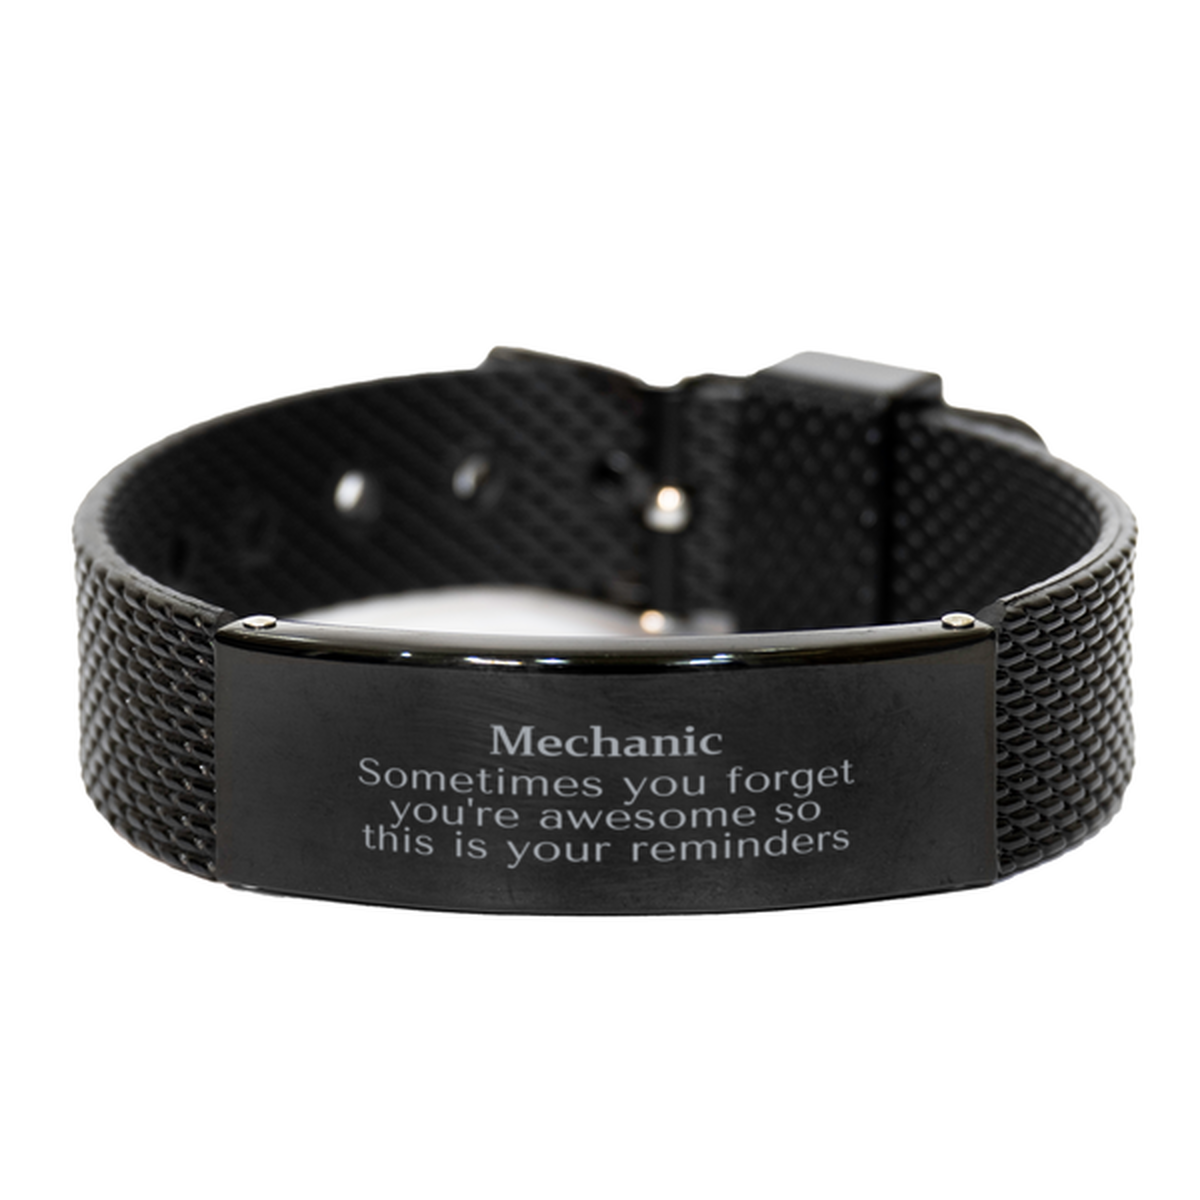 Sentimental Mechanic Black Shark Mesh Bracelet, Mechanic Sometimes you forget you're awesome so this is your reminders, Graduation Christmas Birthday Gifts for Mechanic, Men, Women, Coworkers